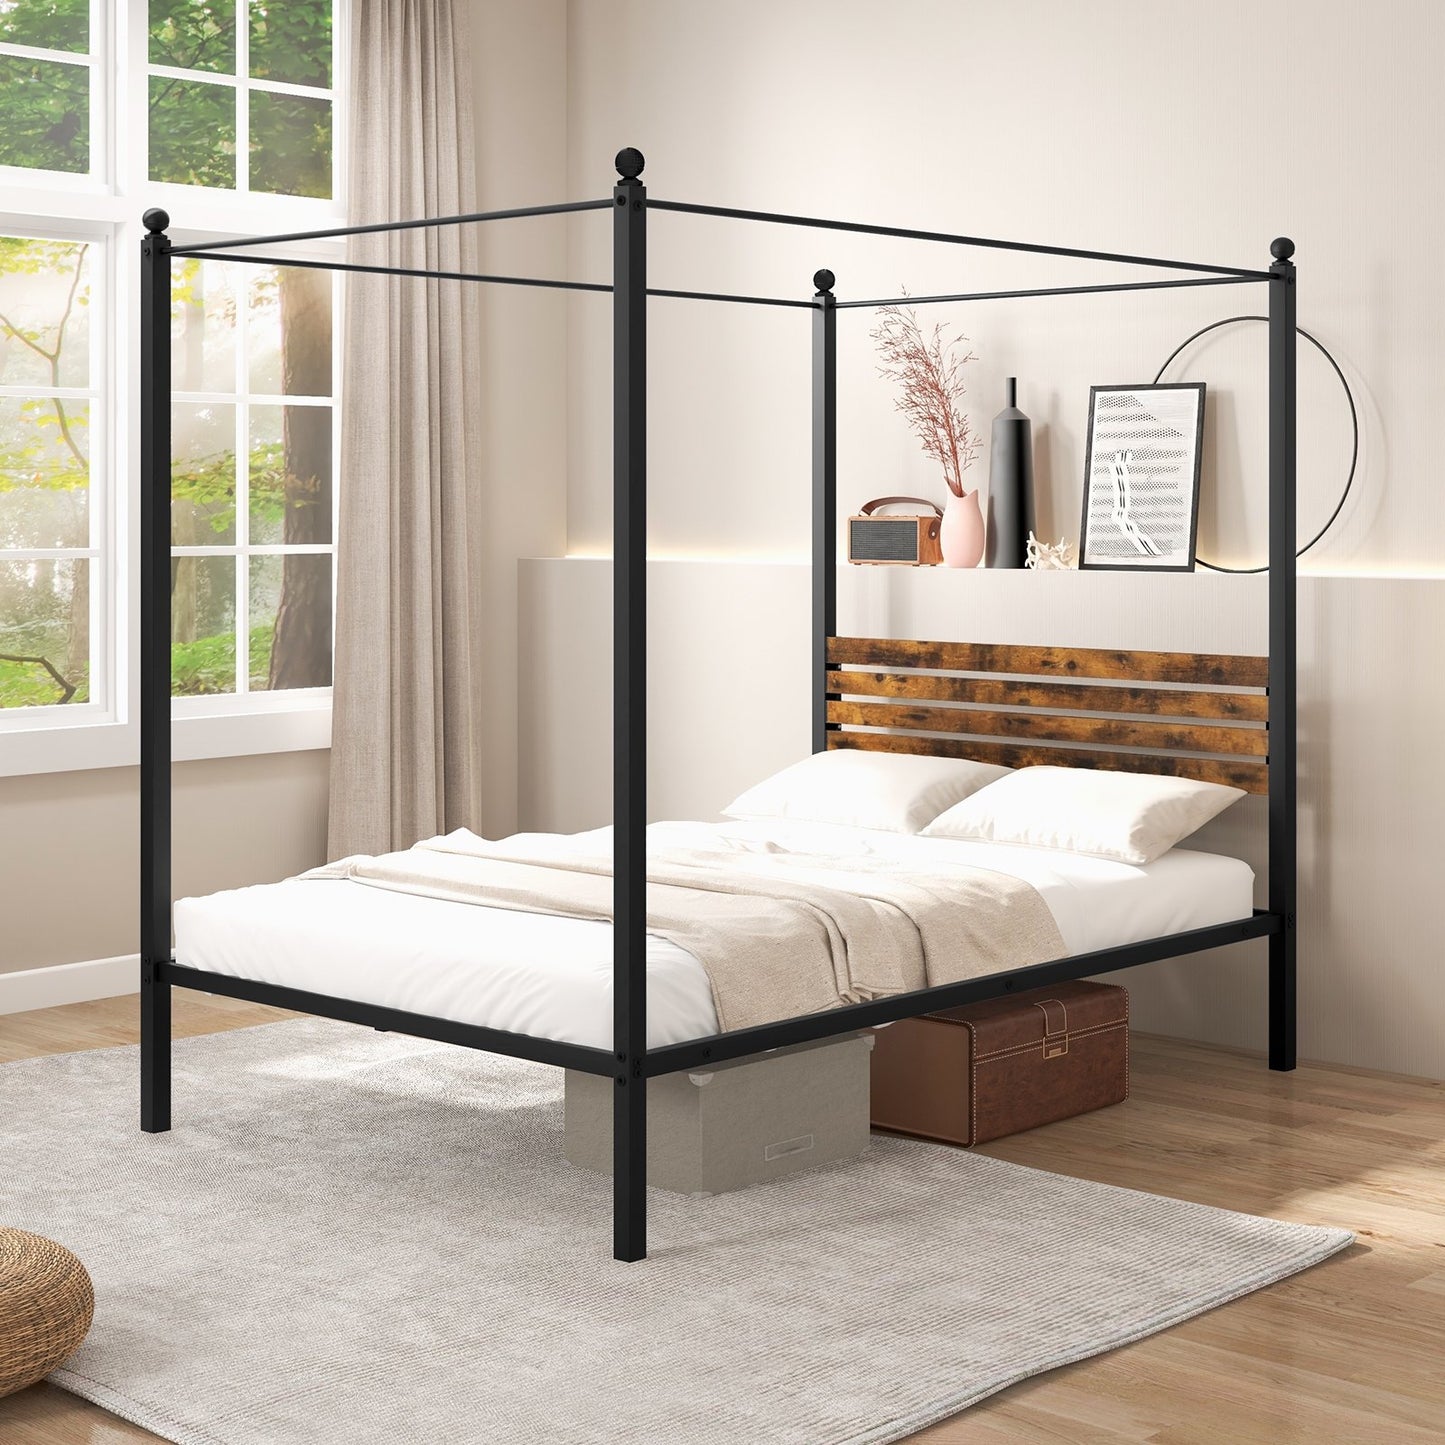 Queen Size Canopy Bed Frame with Under Bed Storage-Full Size, Rustic Brown